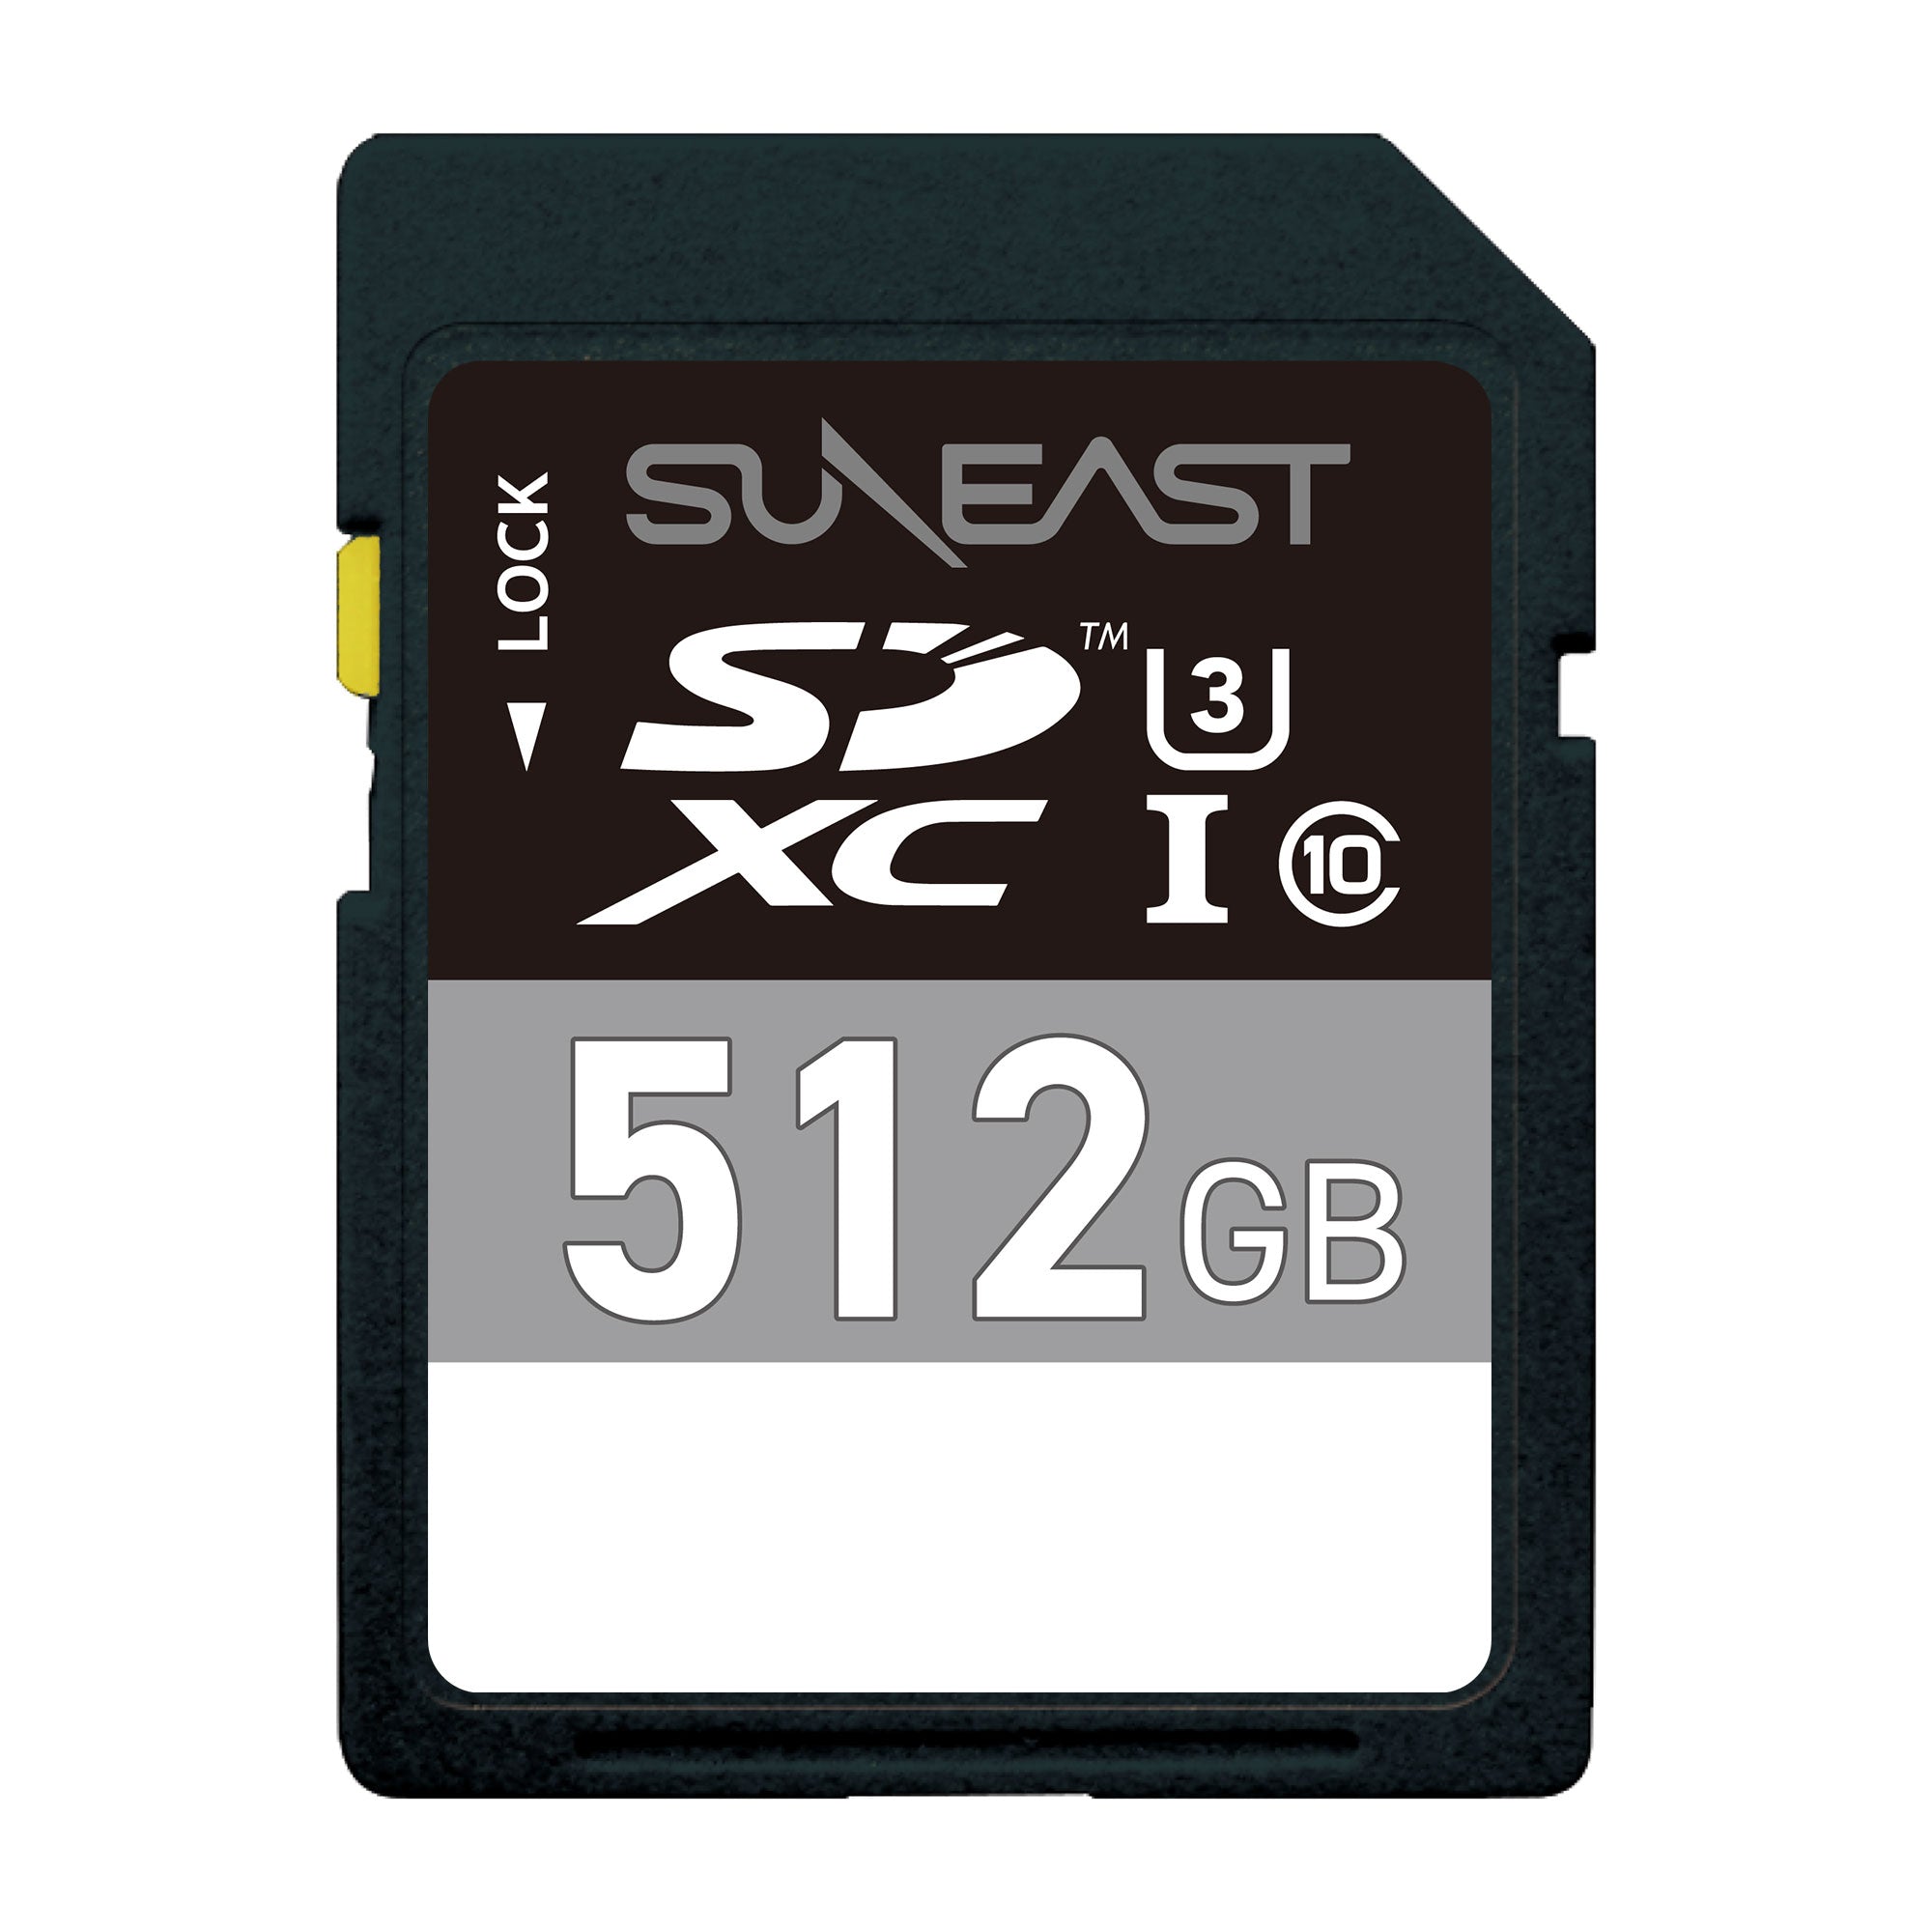 ULTRA PRO SDXC UHS-I Card 512GB - SUNEAST online store